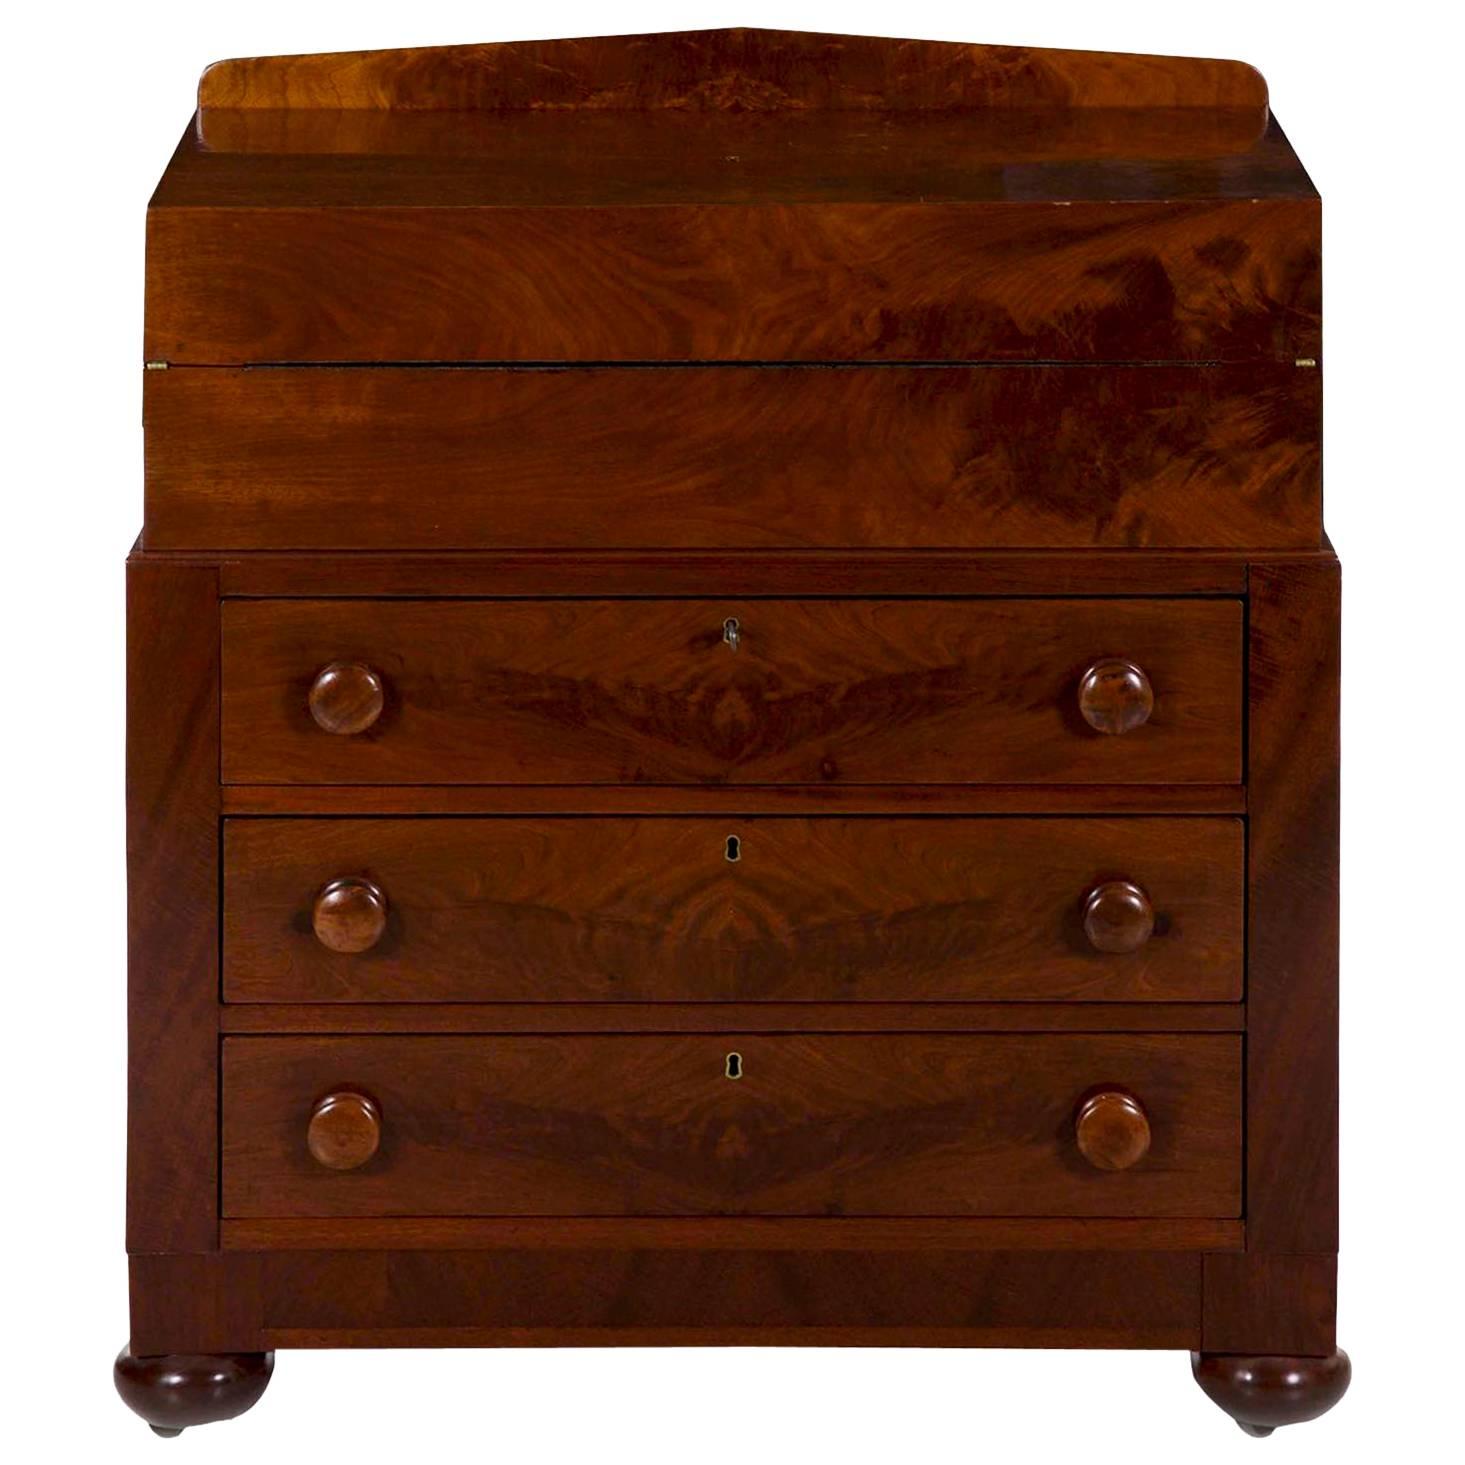 American Late Classical Crotch-Mahogany Writing Desk over Chest c. 1850-70